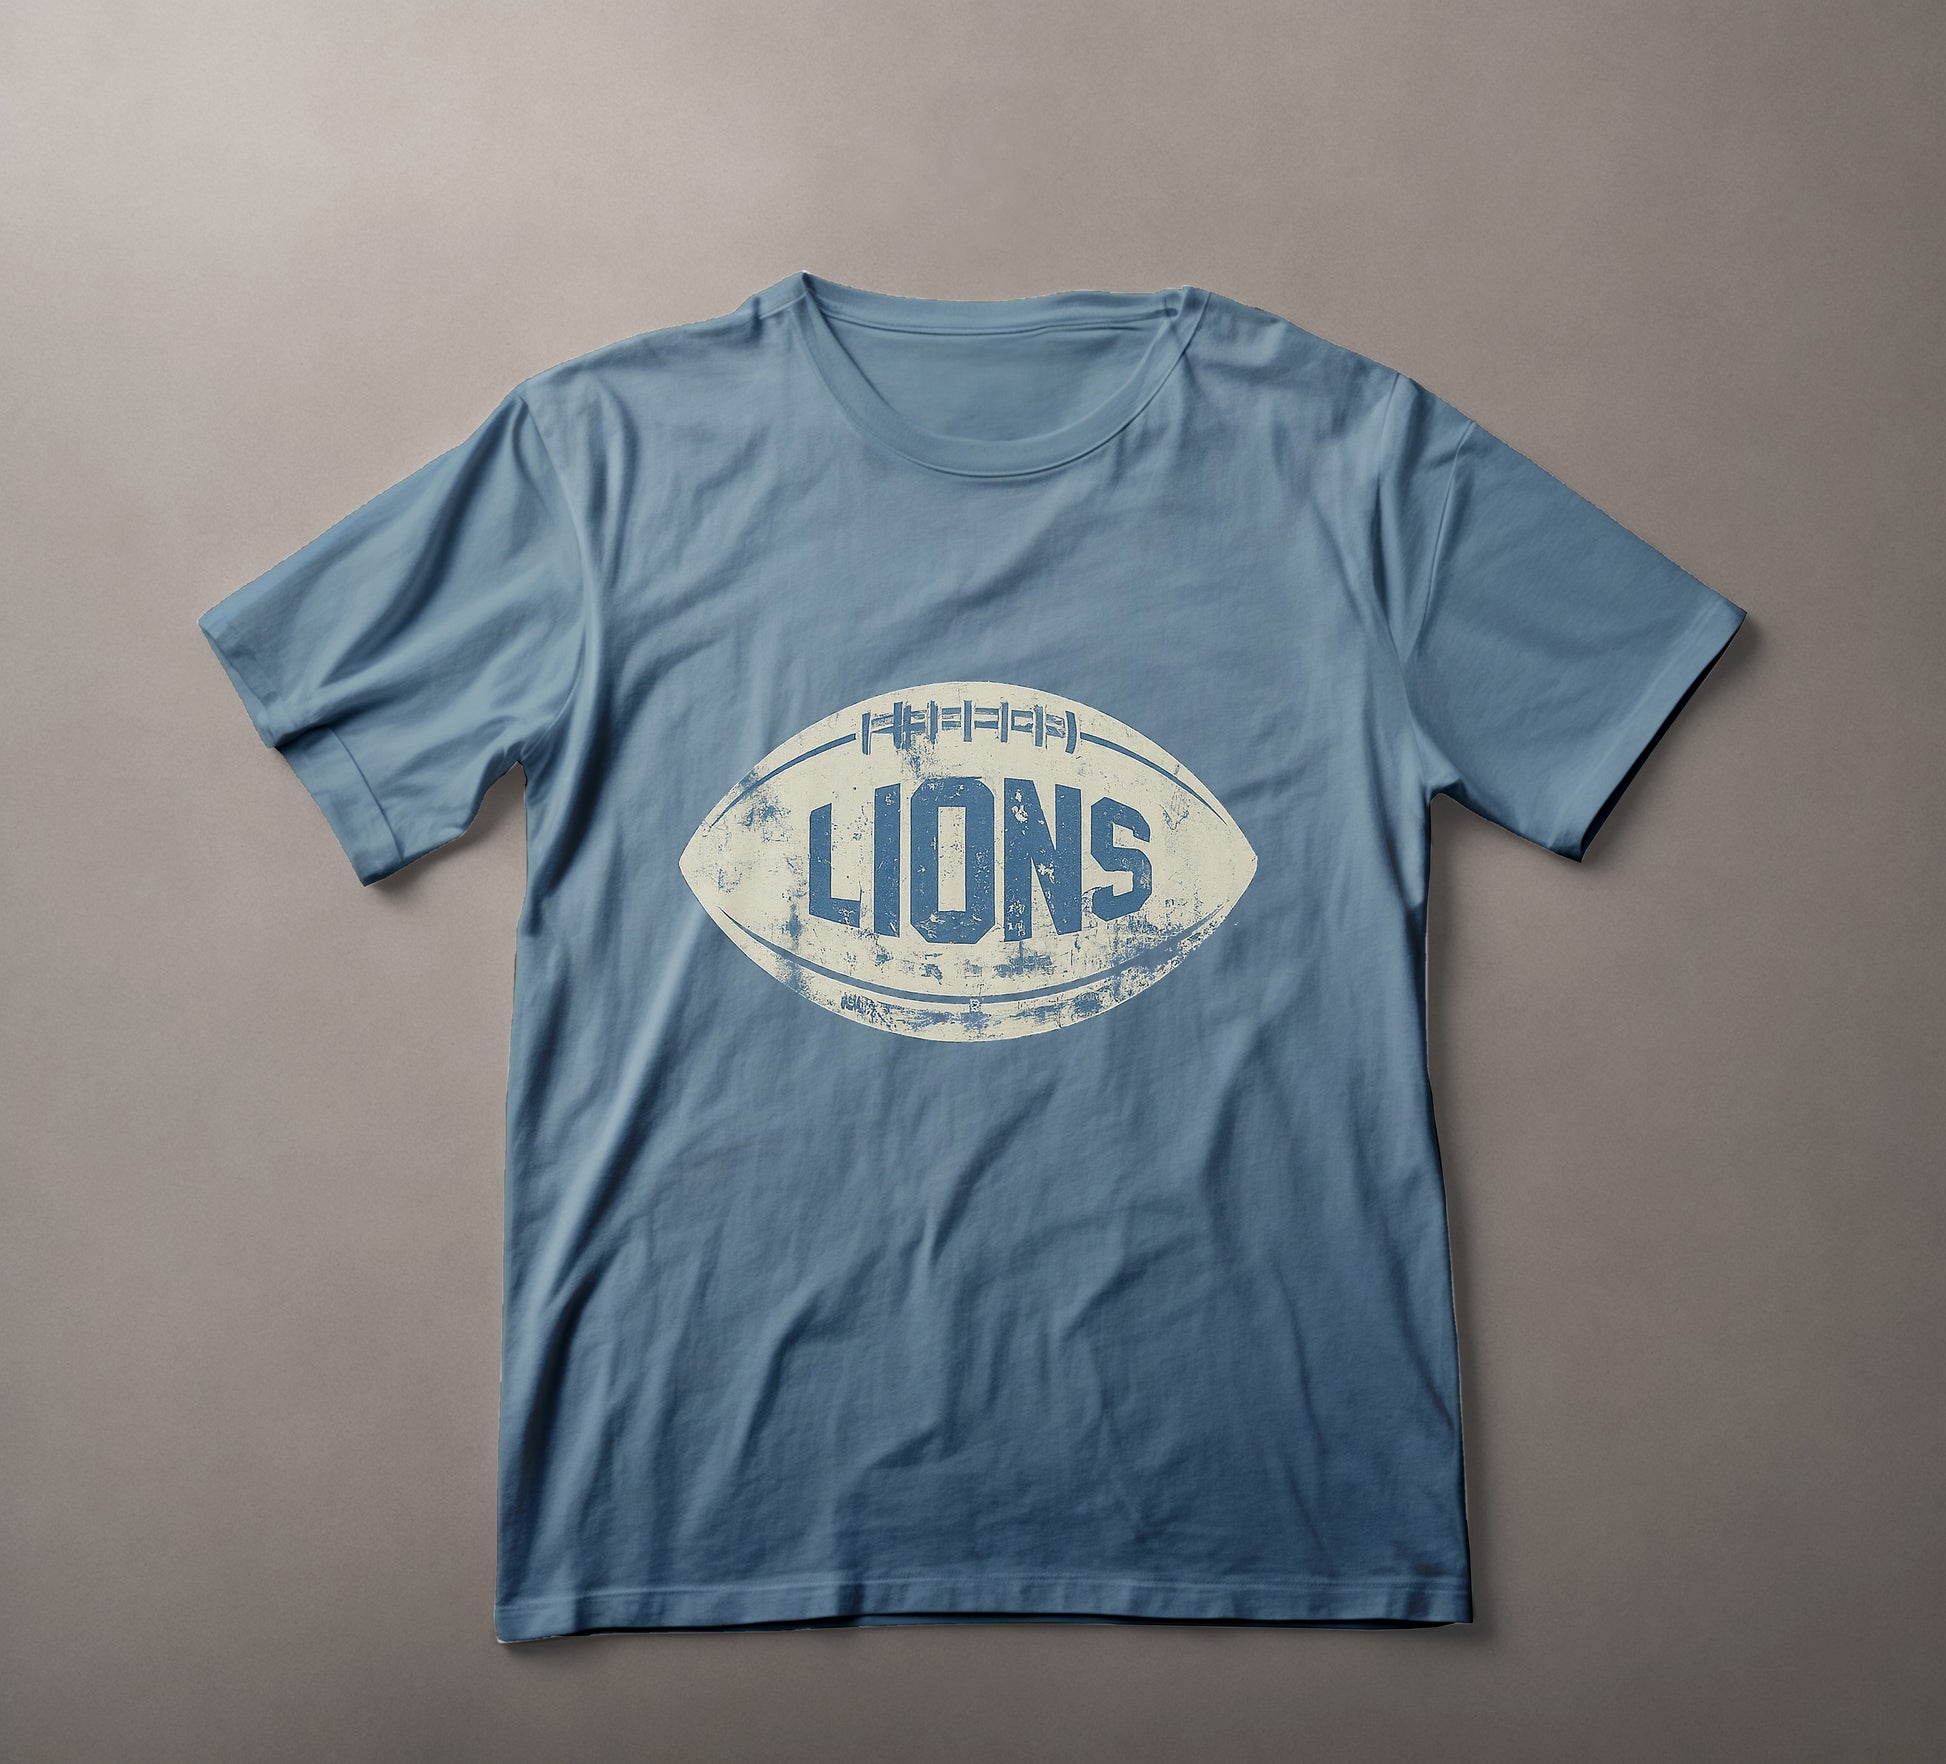 Vintage Football T-Shirt, Retro Lions Tee, Distressed Sports Apparel, Classic Gridiron Shirt, Old-School Football Gear, Team Spirit Clothing, Casual Athletic Wear, Sports Legacy Fashion, Faded Rugby Ball Design, Football Fan Merchandise, Heritage Sports Tee